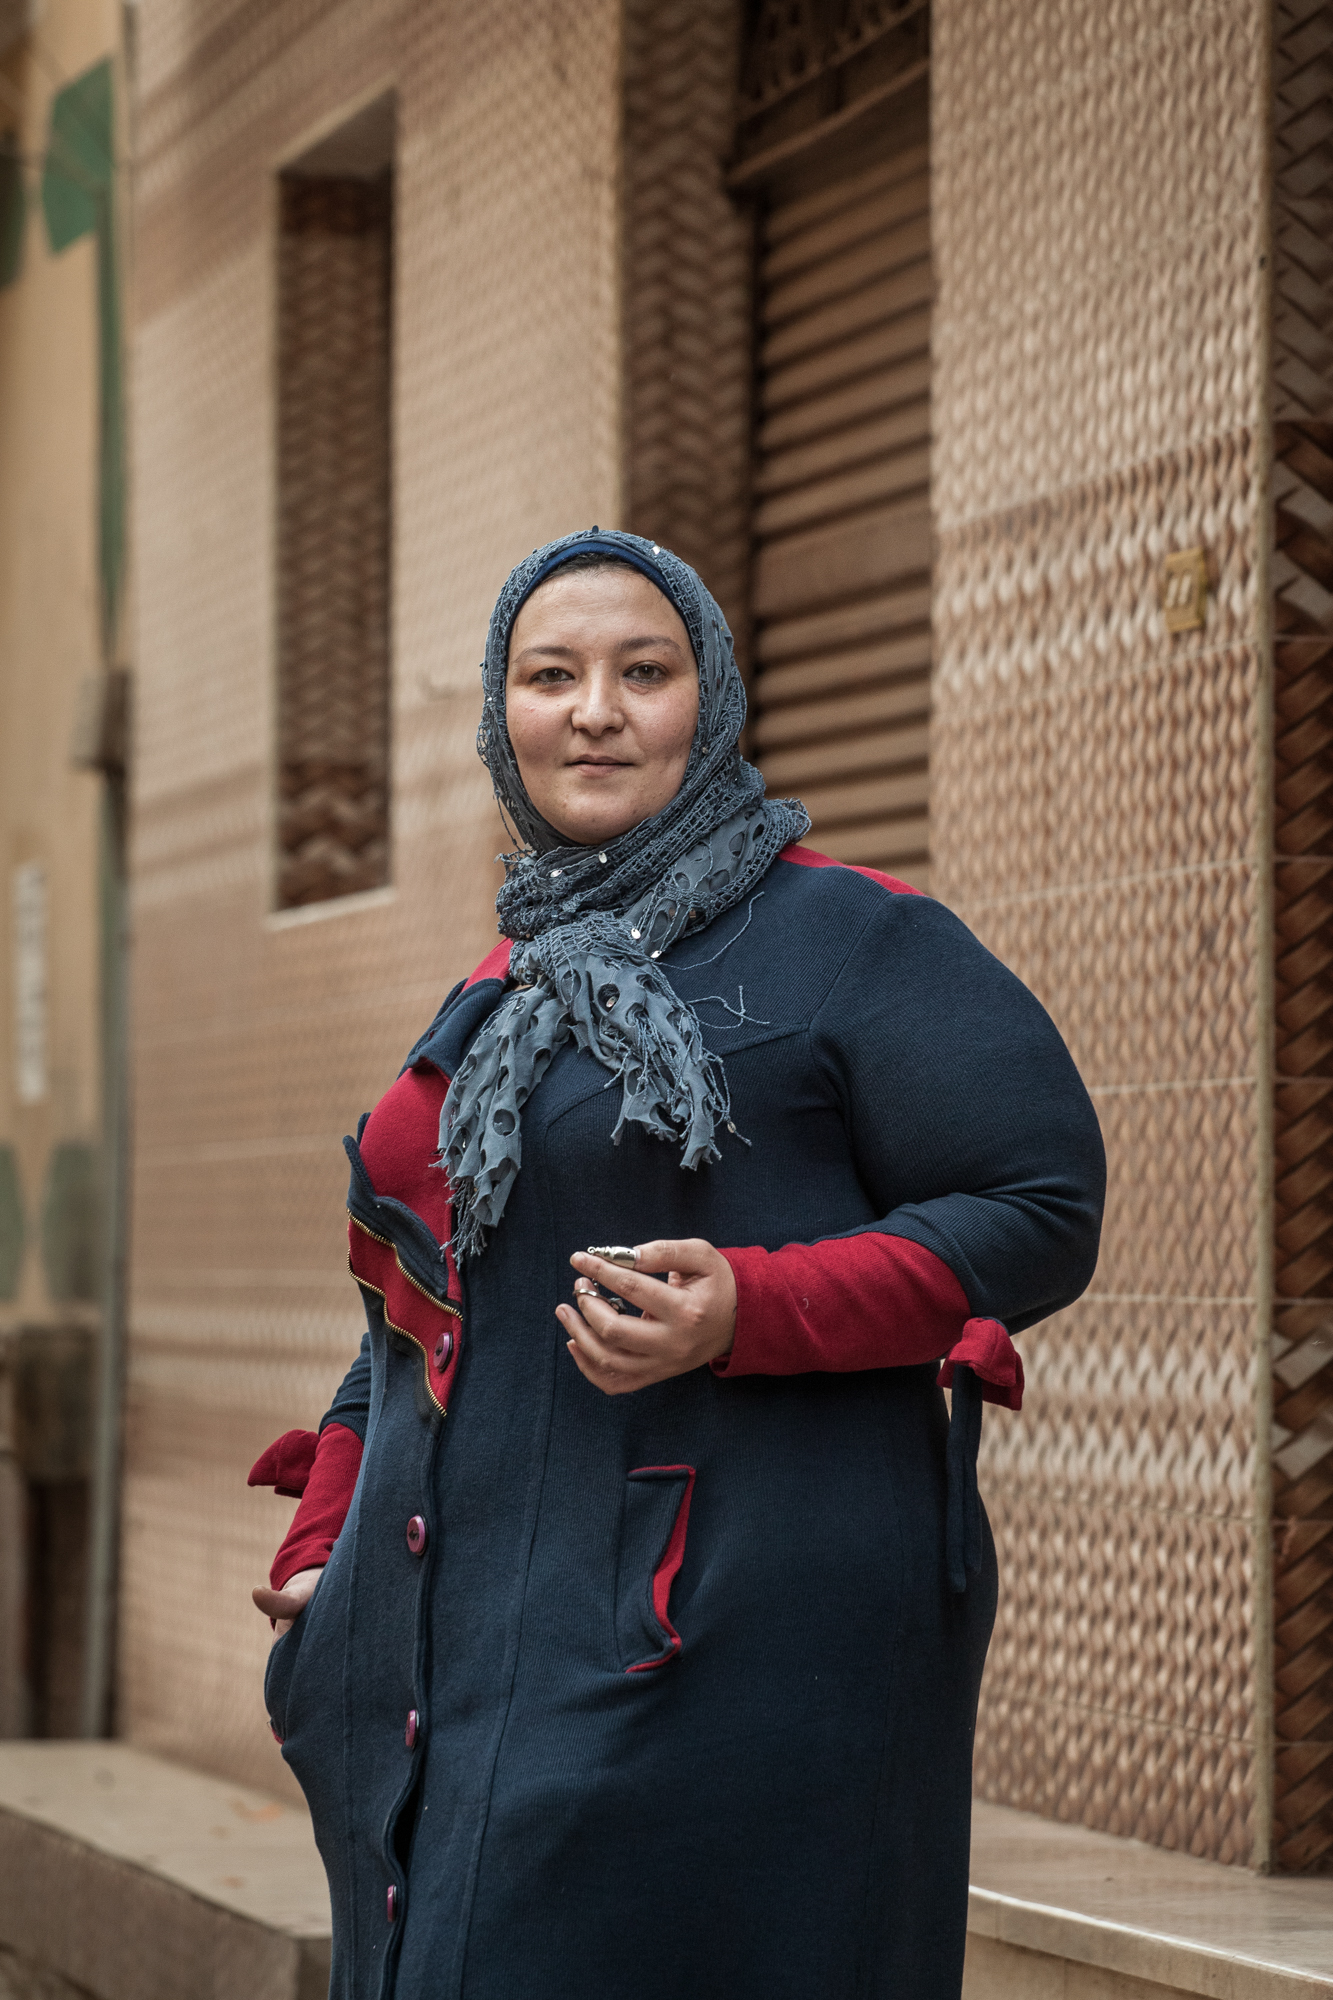 Portrait Heba Saad in Mansura (200km nothr of Cairo), 33 years old, is living alone near to Mansura. She is the oner of a factory for men’s underwear. 10 women are working for her. Her parents divorced, married again, and she lives on her own and is not